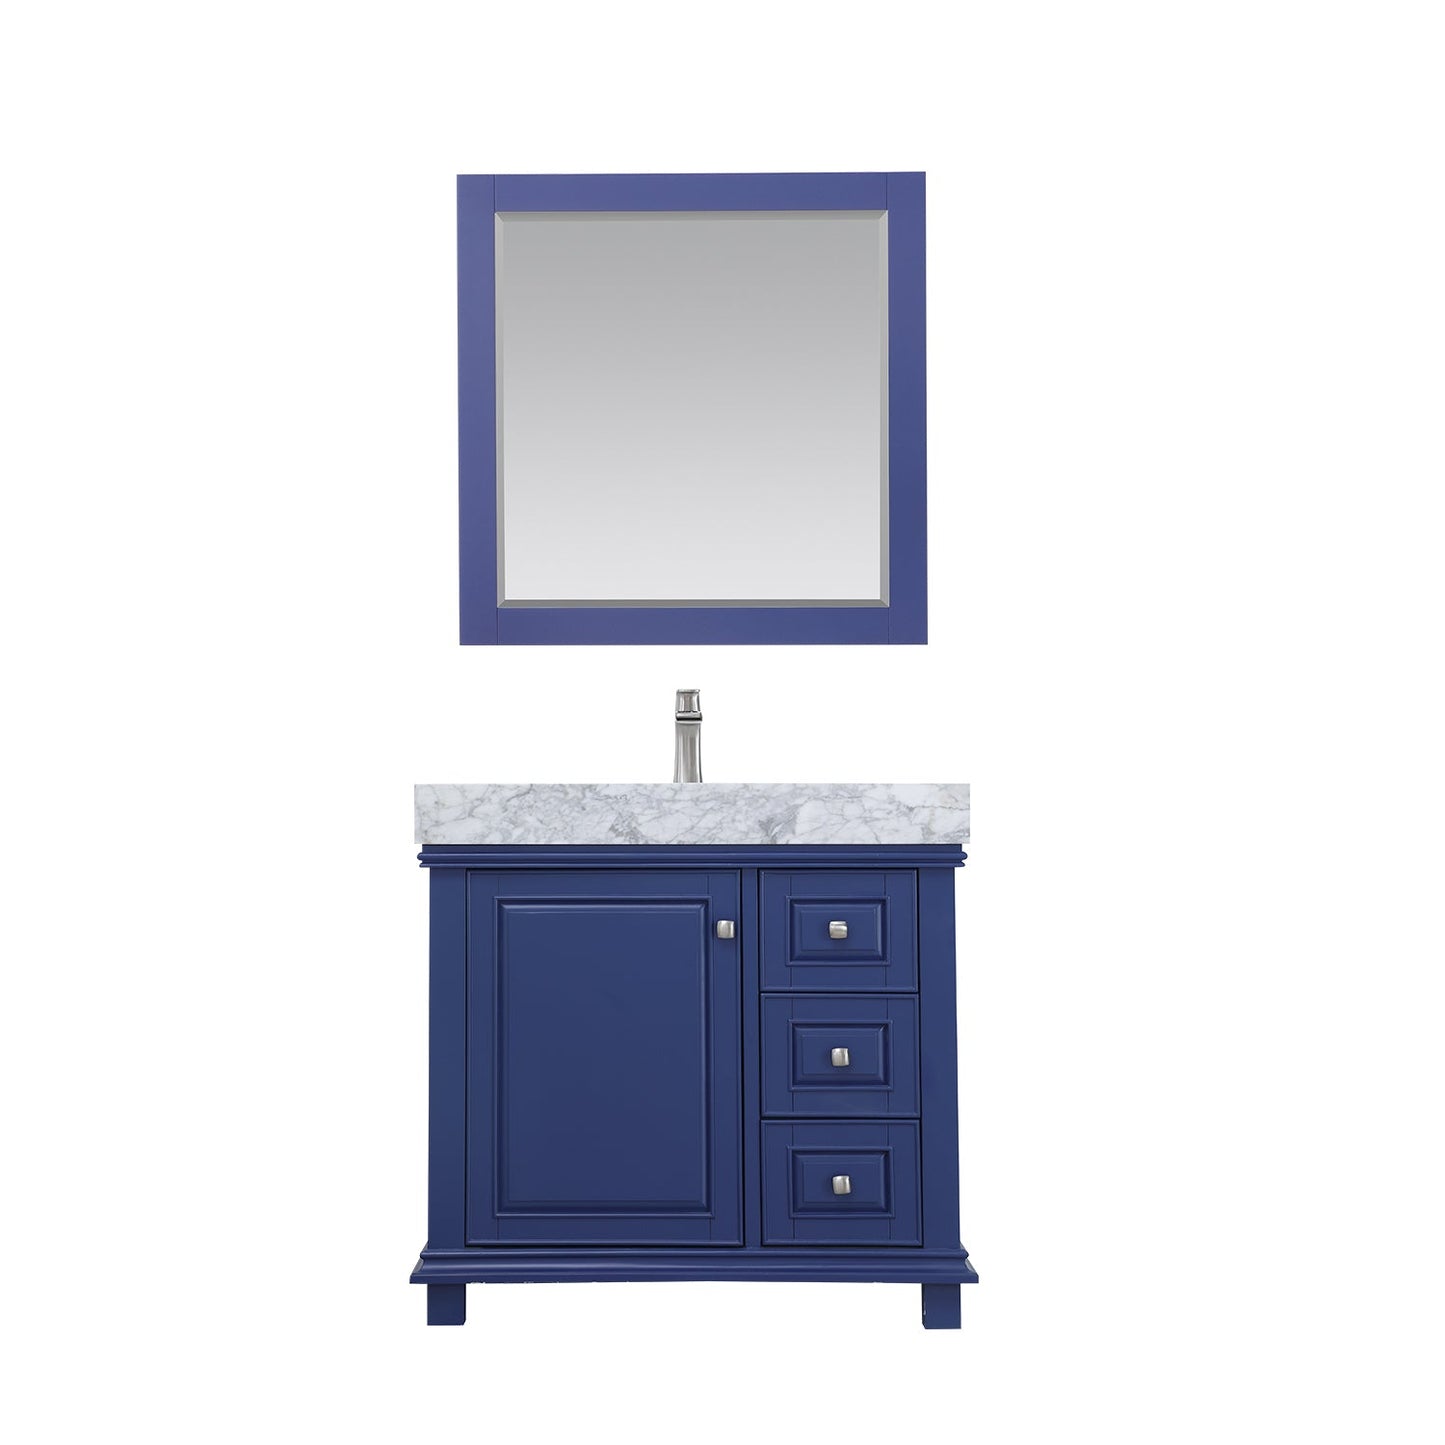 Jardin 36" Single Bathroom Vanity Set in Jewelry Blue and Carrara White Marble Countertop with Mirror